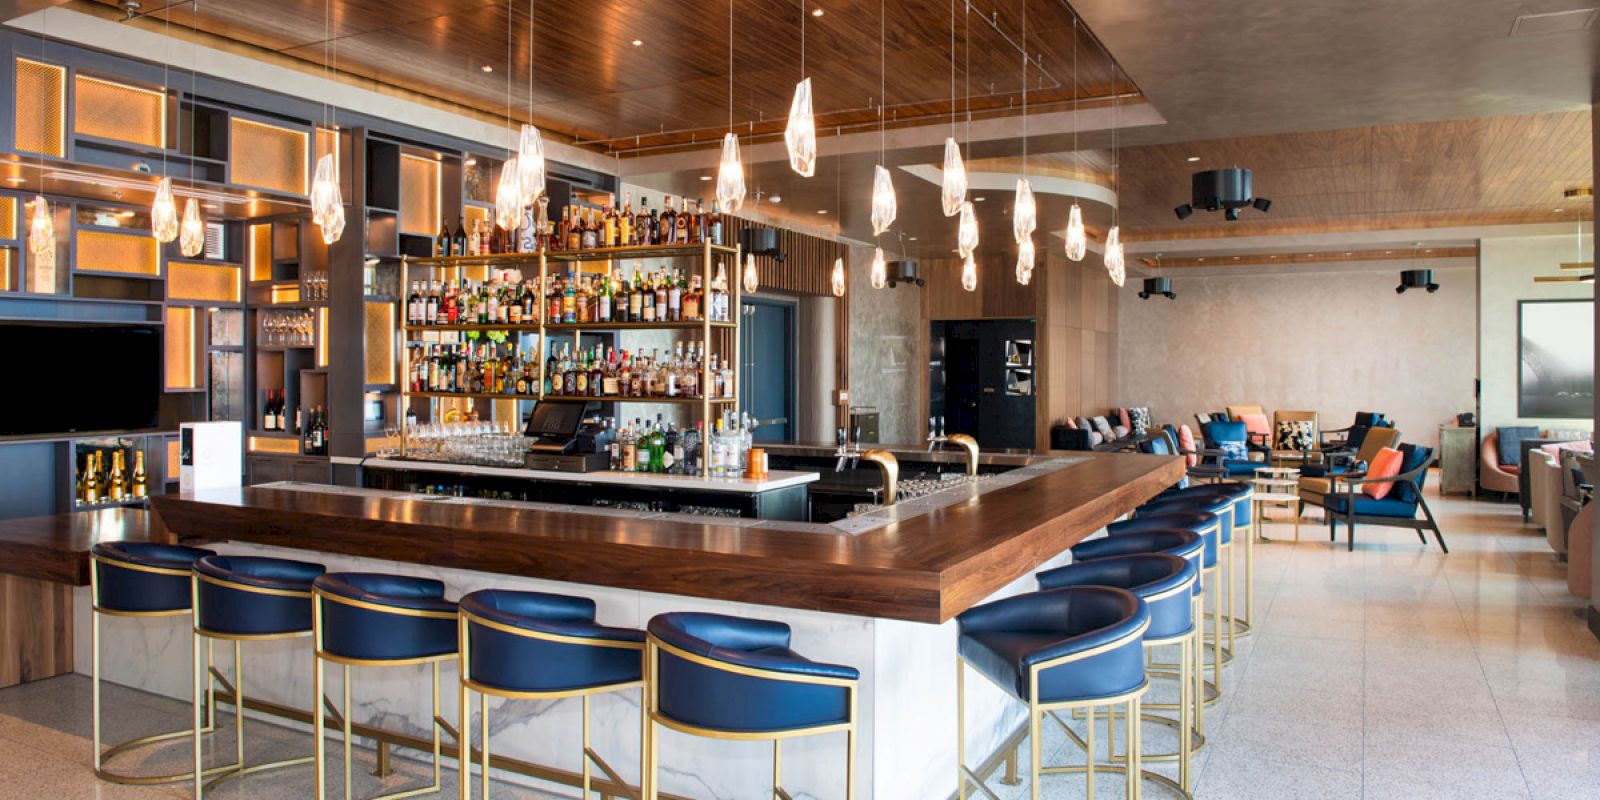 The image shows a modern bar with blue chairs, a wooden countertop, a well-stocked liquor shelf, and pendant lighting in a spacious, elegant room.